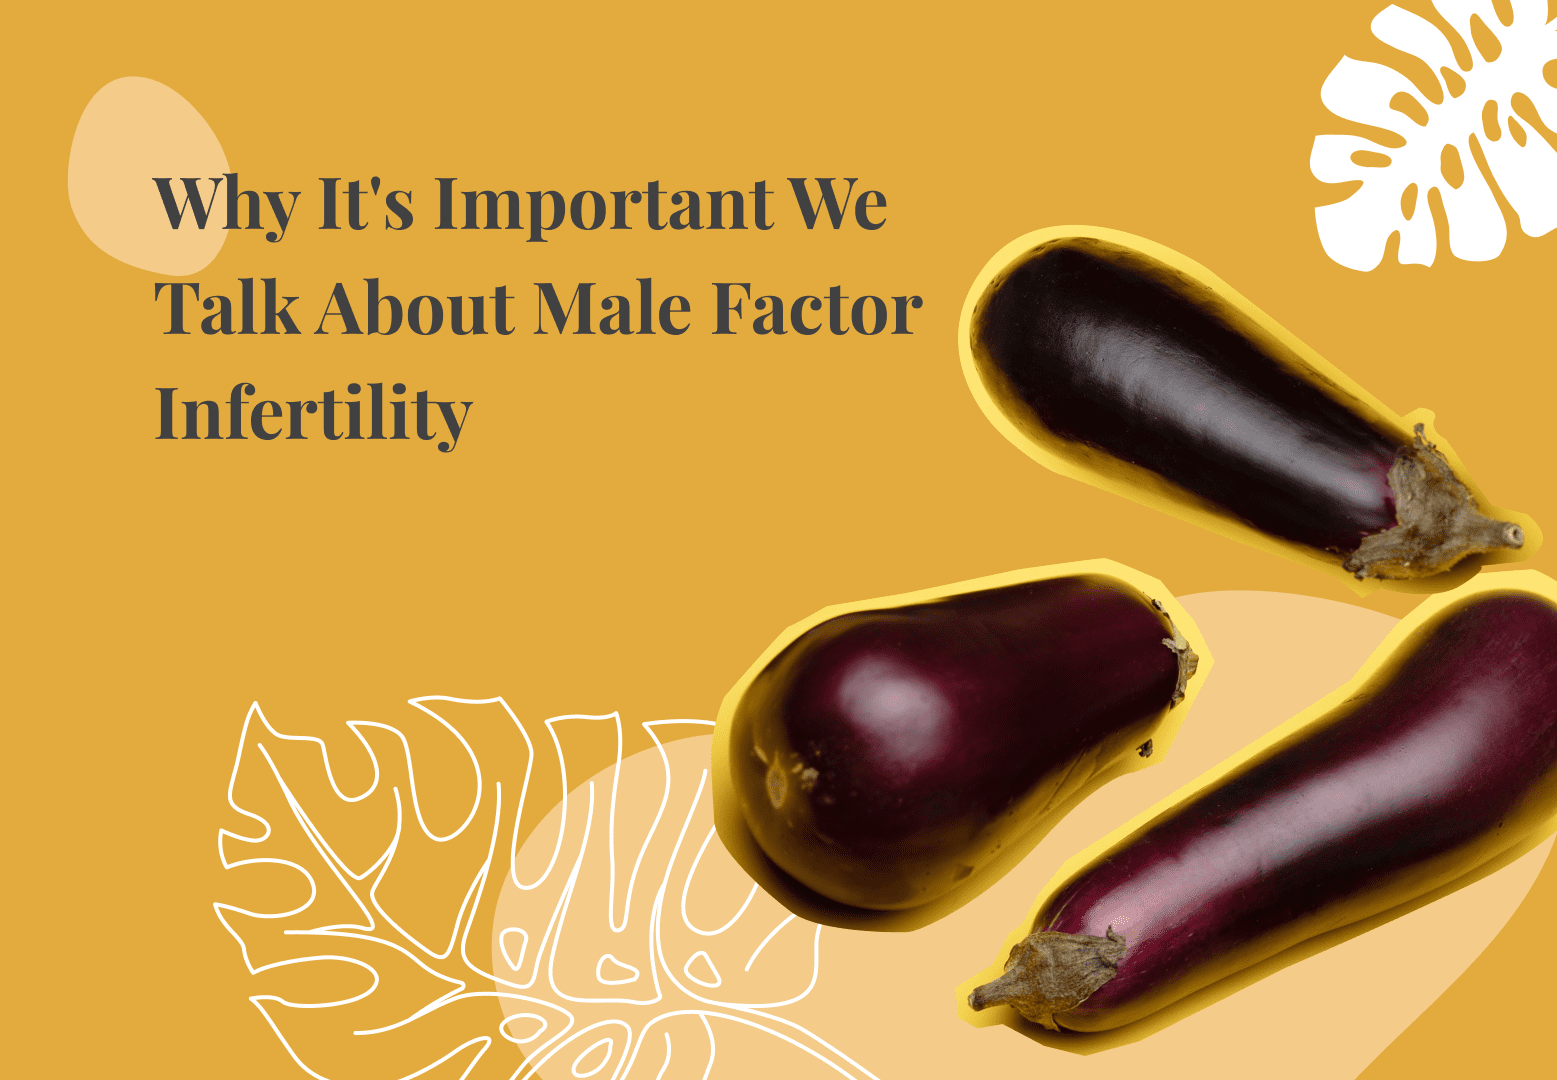 7 Major Reasons to Talk About Male Factor Infertility